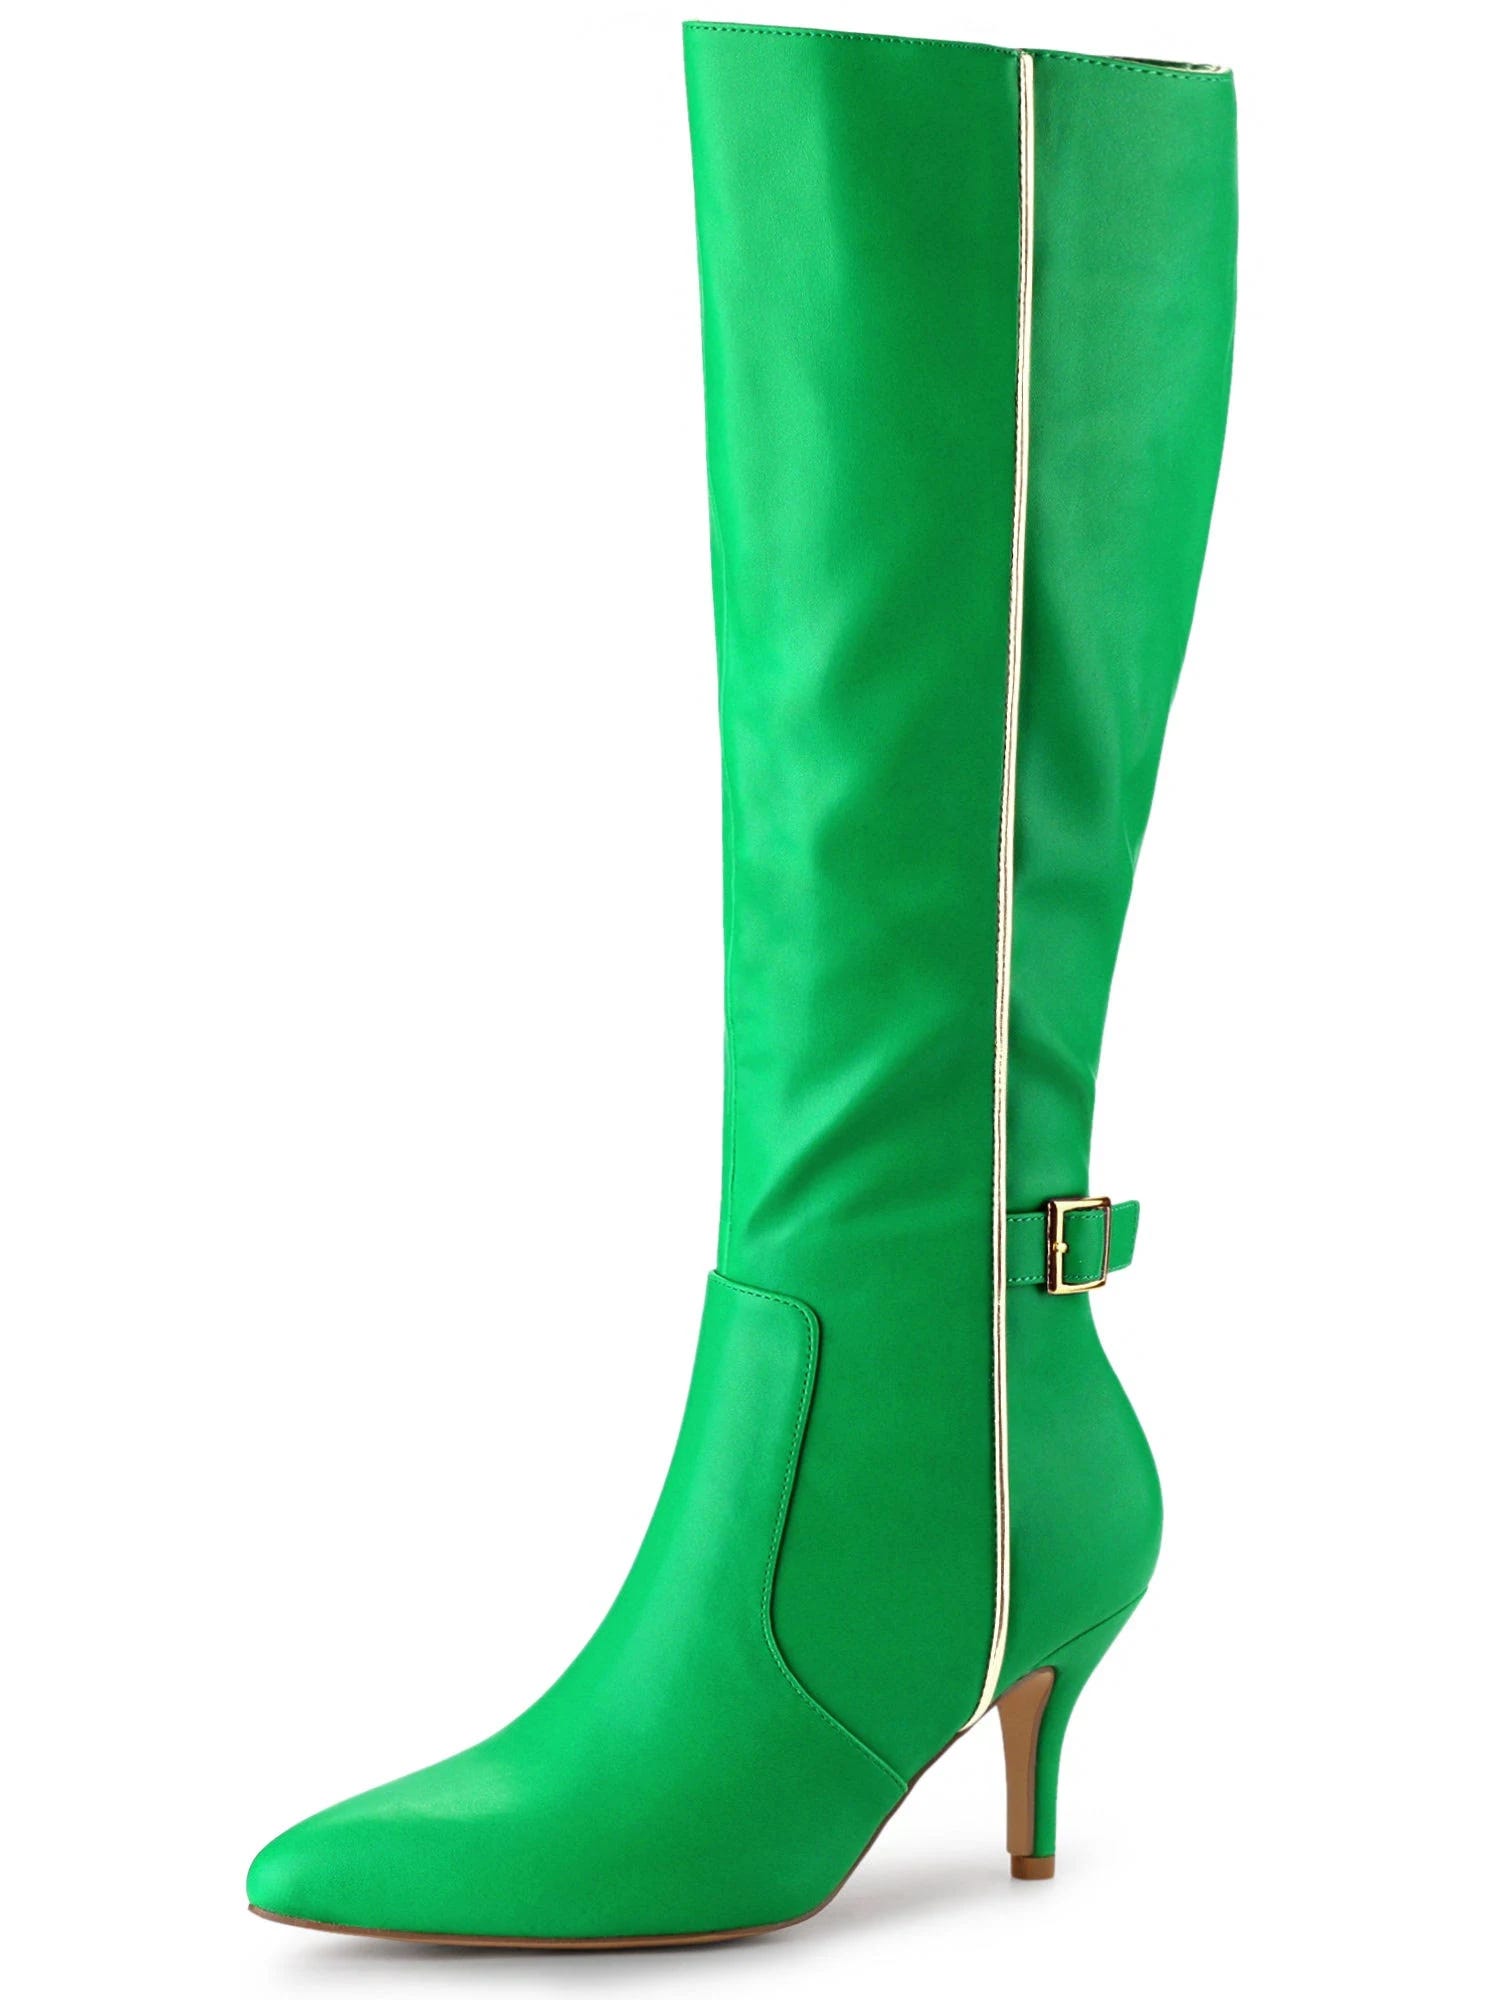 Knee-High Green Stiletto Boots with Side Buckles | Image